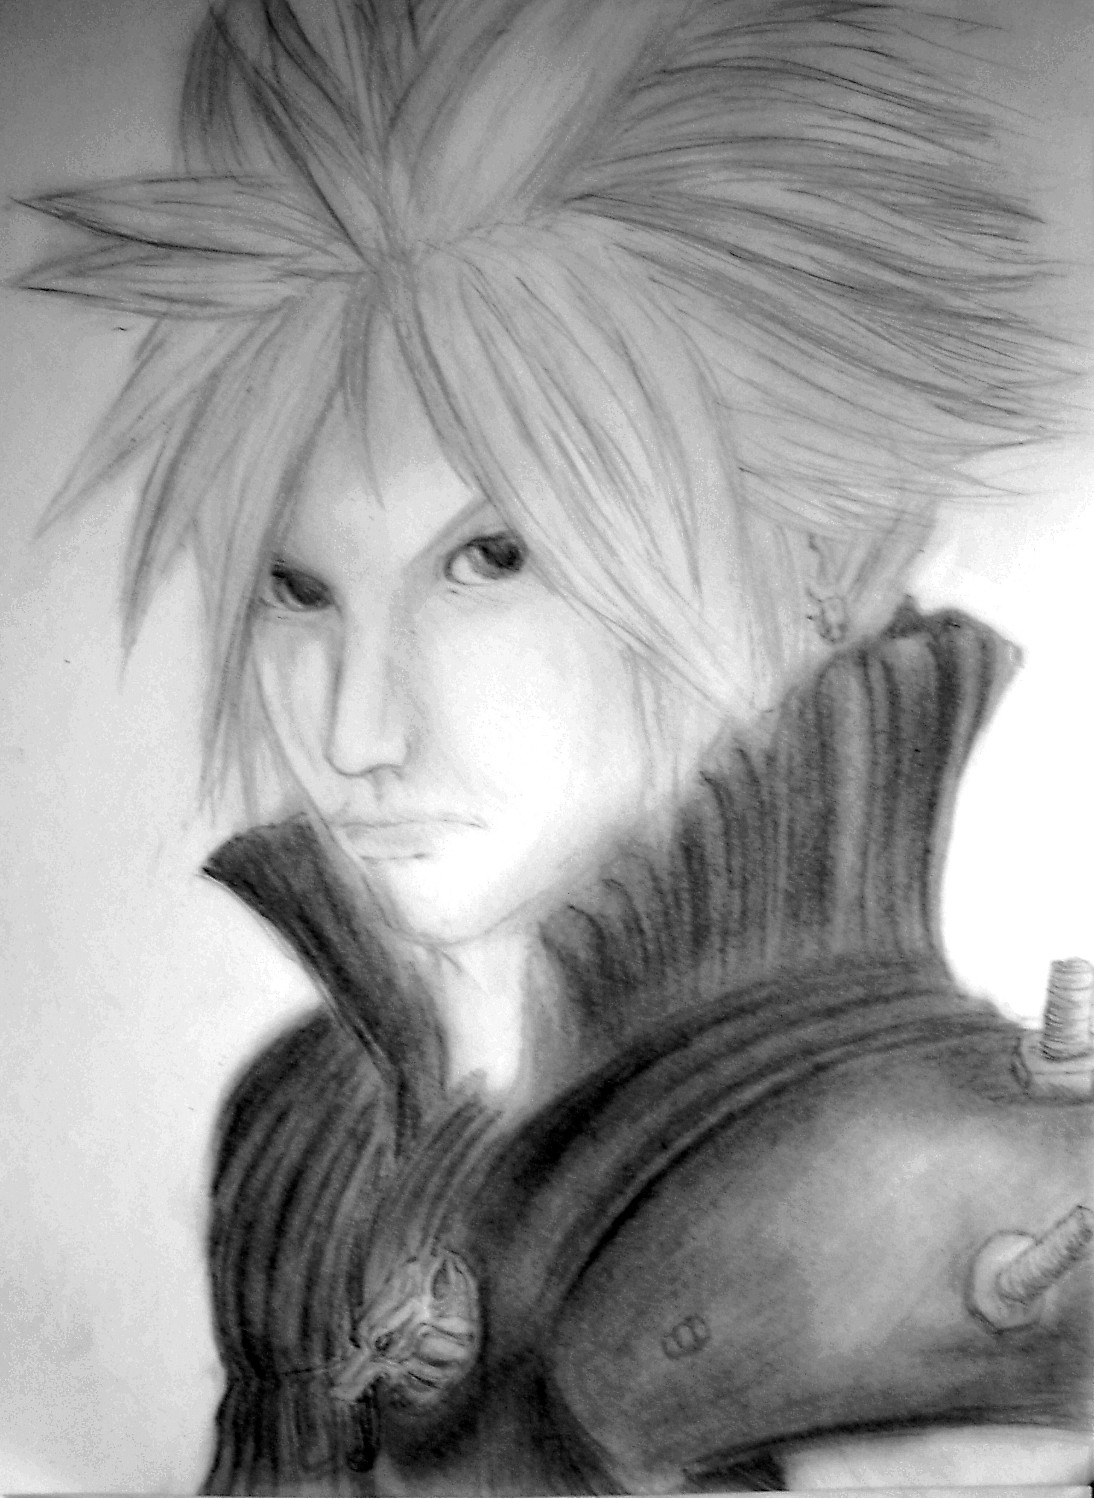 The Beast That is Cloud by BGSGLGW1